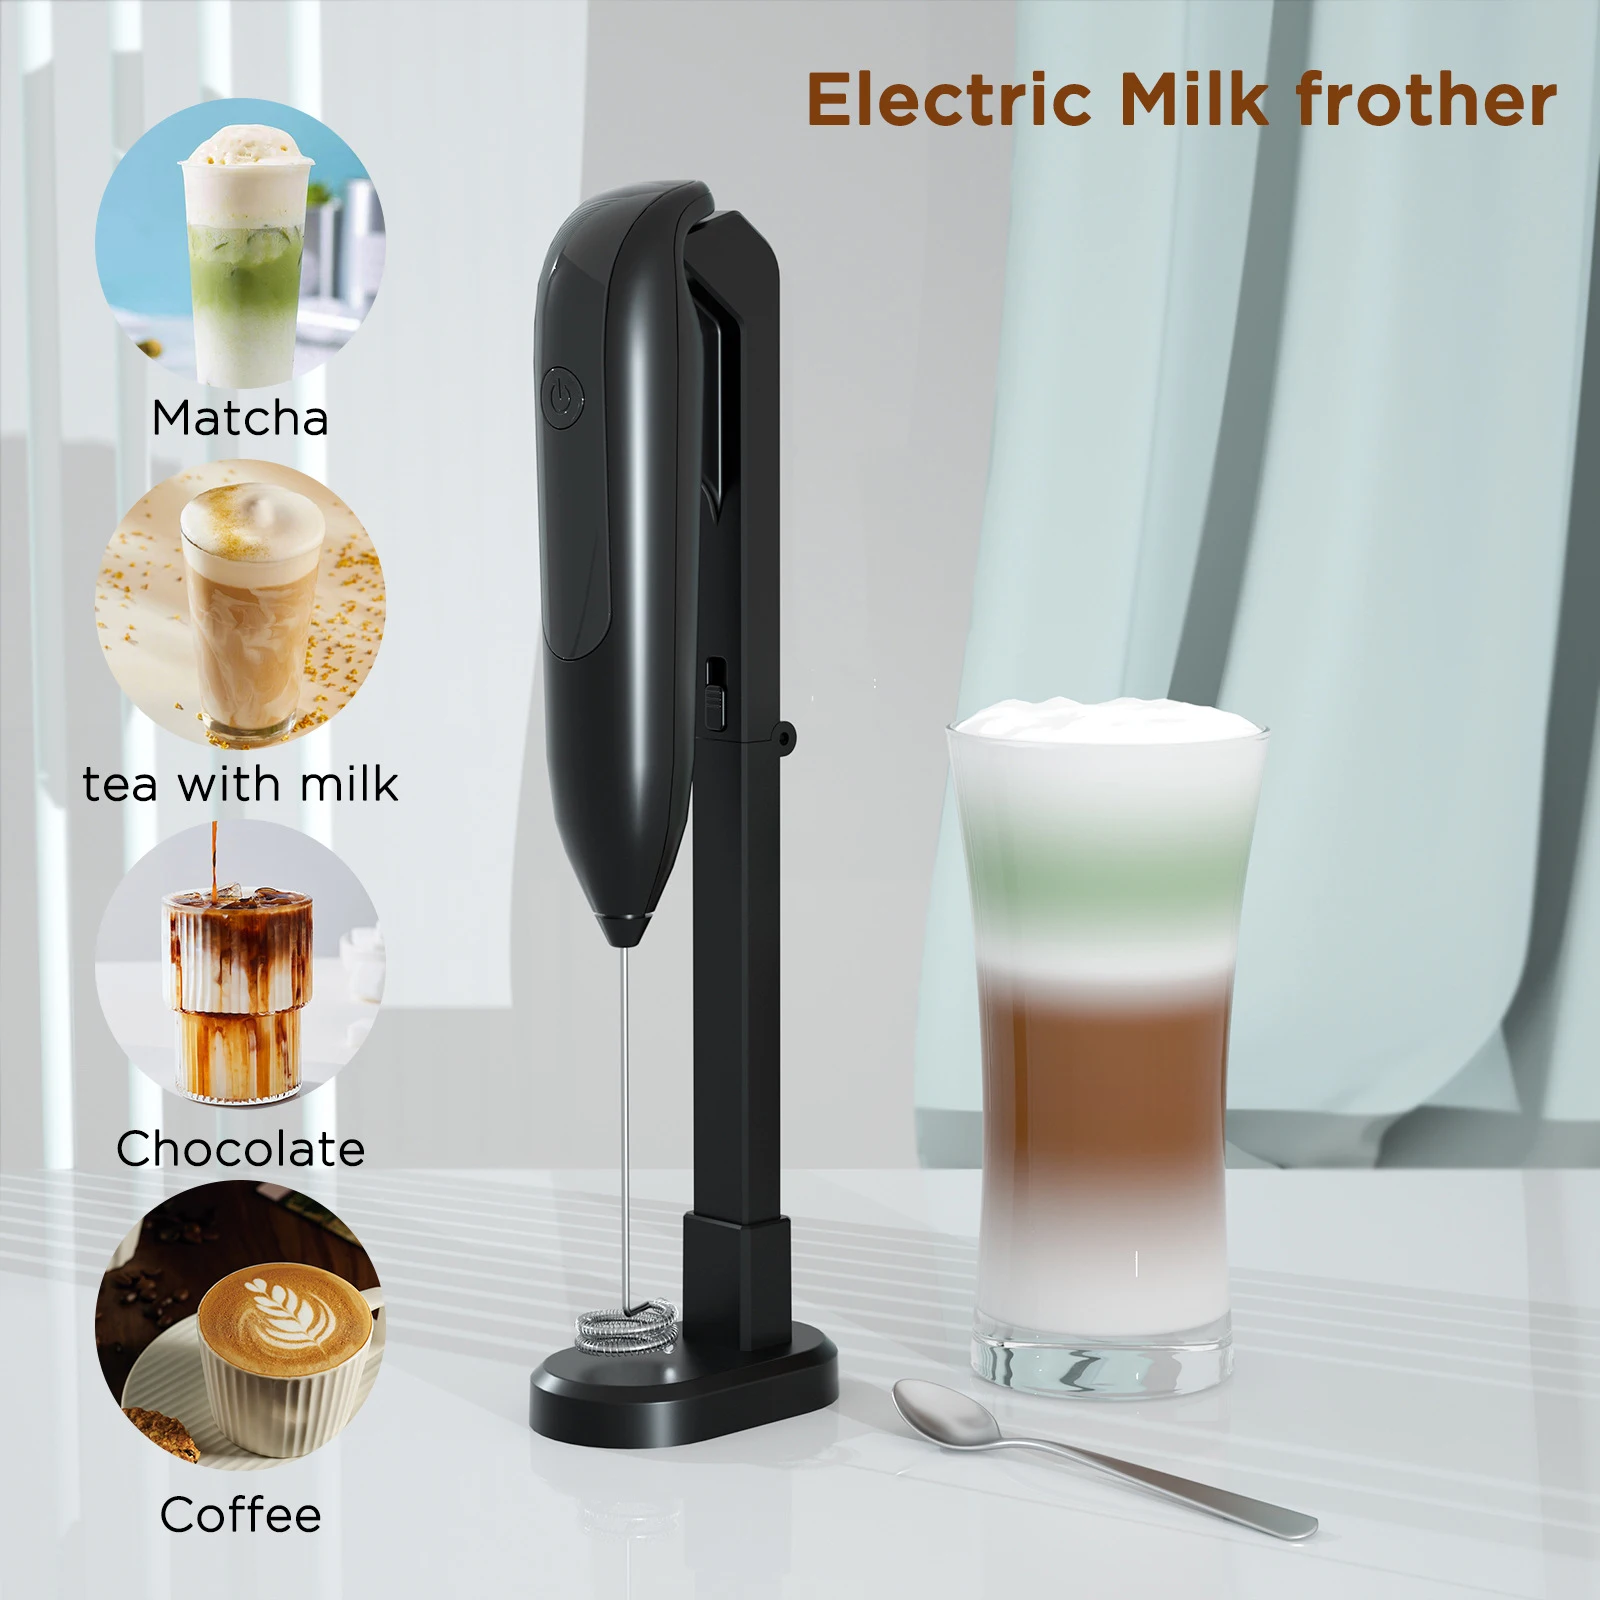 

1PC Handheld Electric Milk Frother Egg Beater Maker Kitchen Drink Foamer Mixer Coffee Creamer Whisk Frothy Stirring Tools